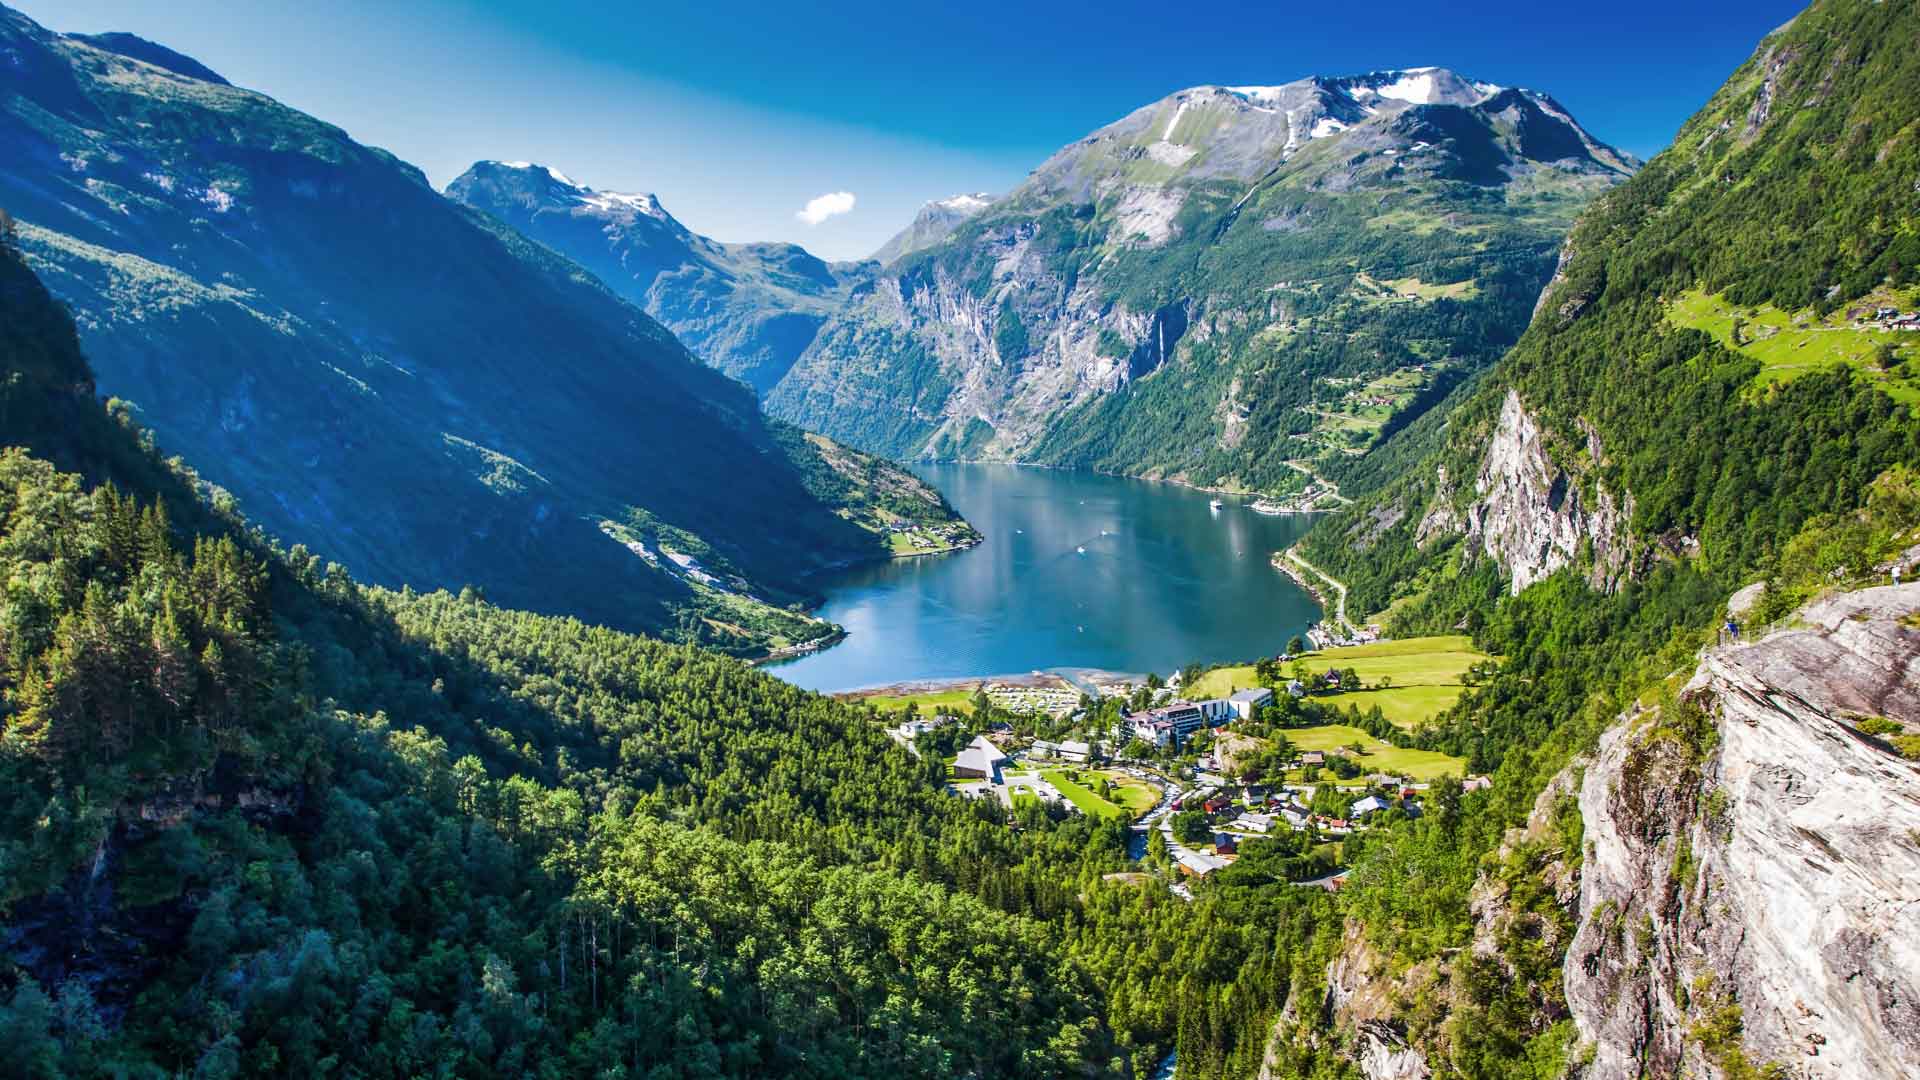 View over Geirangerfjord in Norway